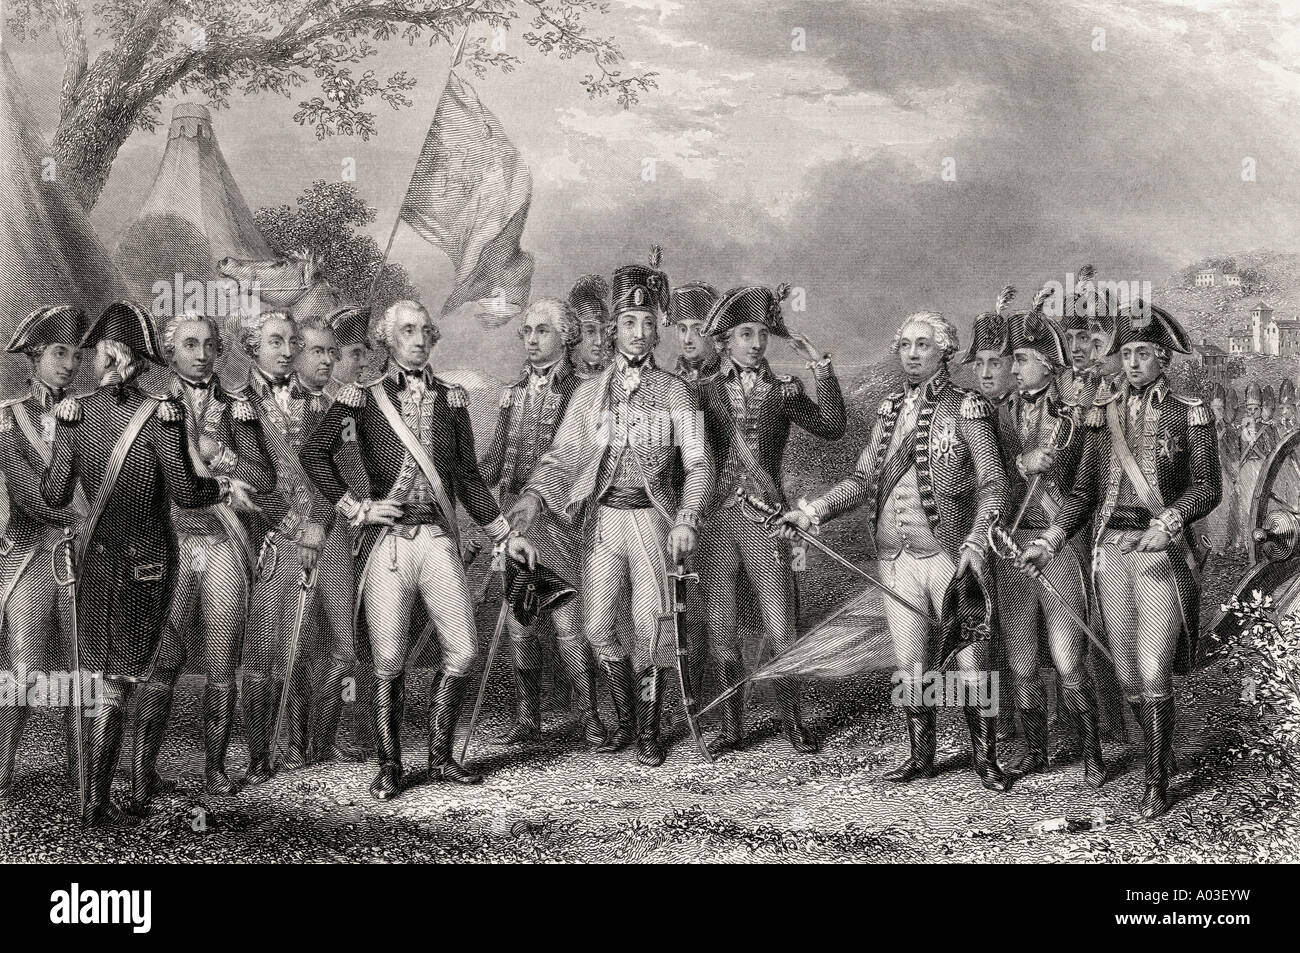 The British under the command of General Charles Cornwallis surrendering their arms to General Washington, 1781. Stock Photo